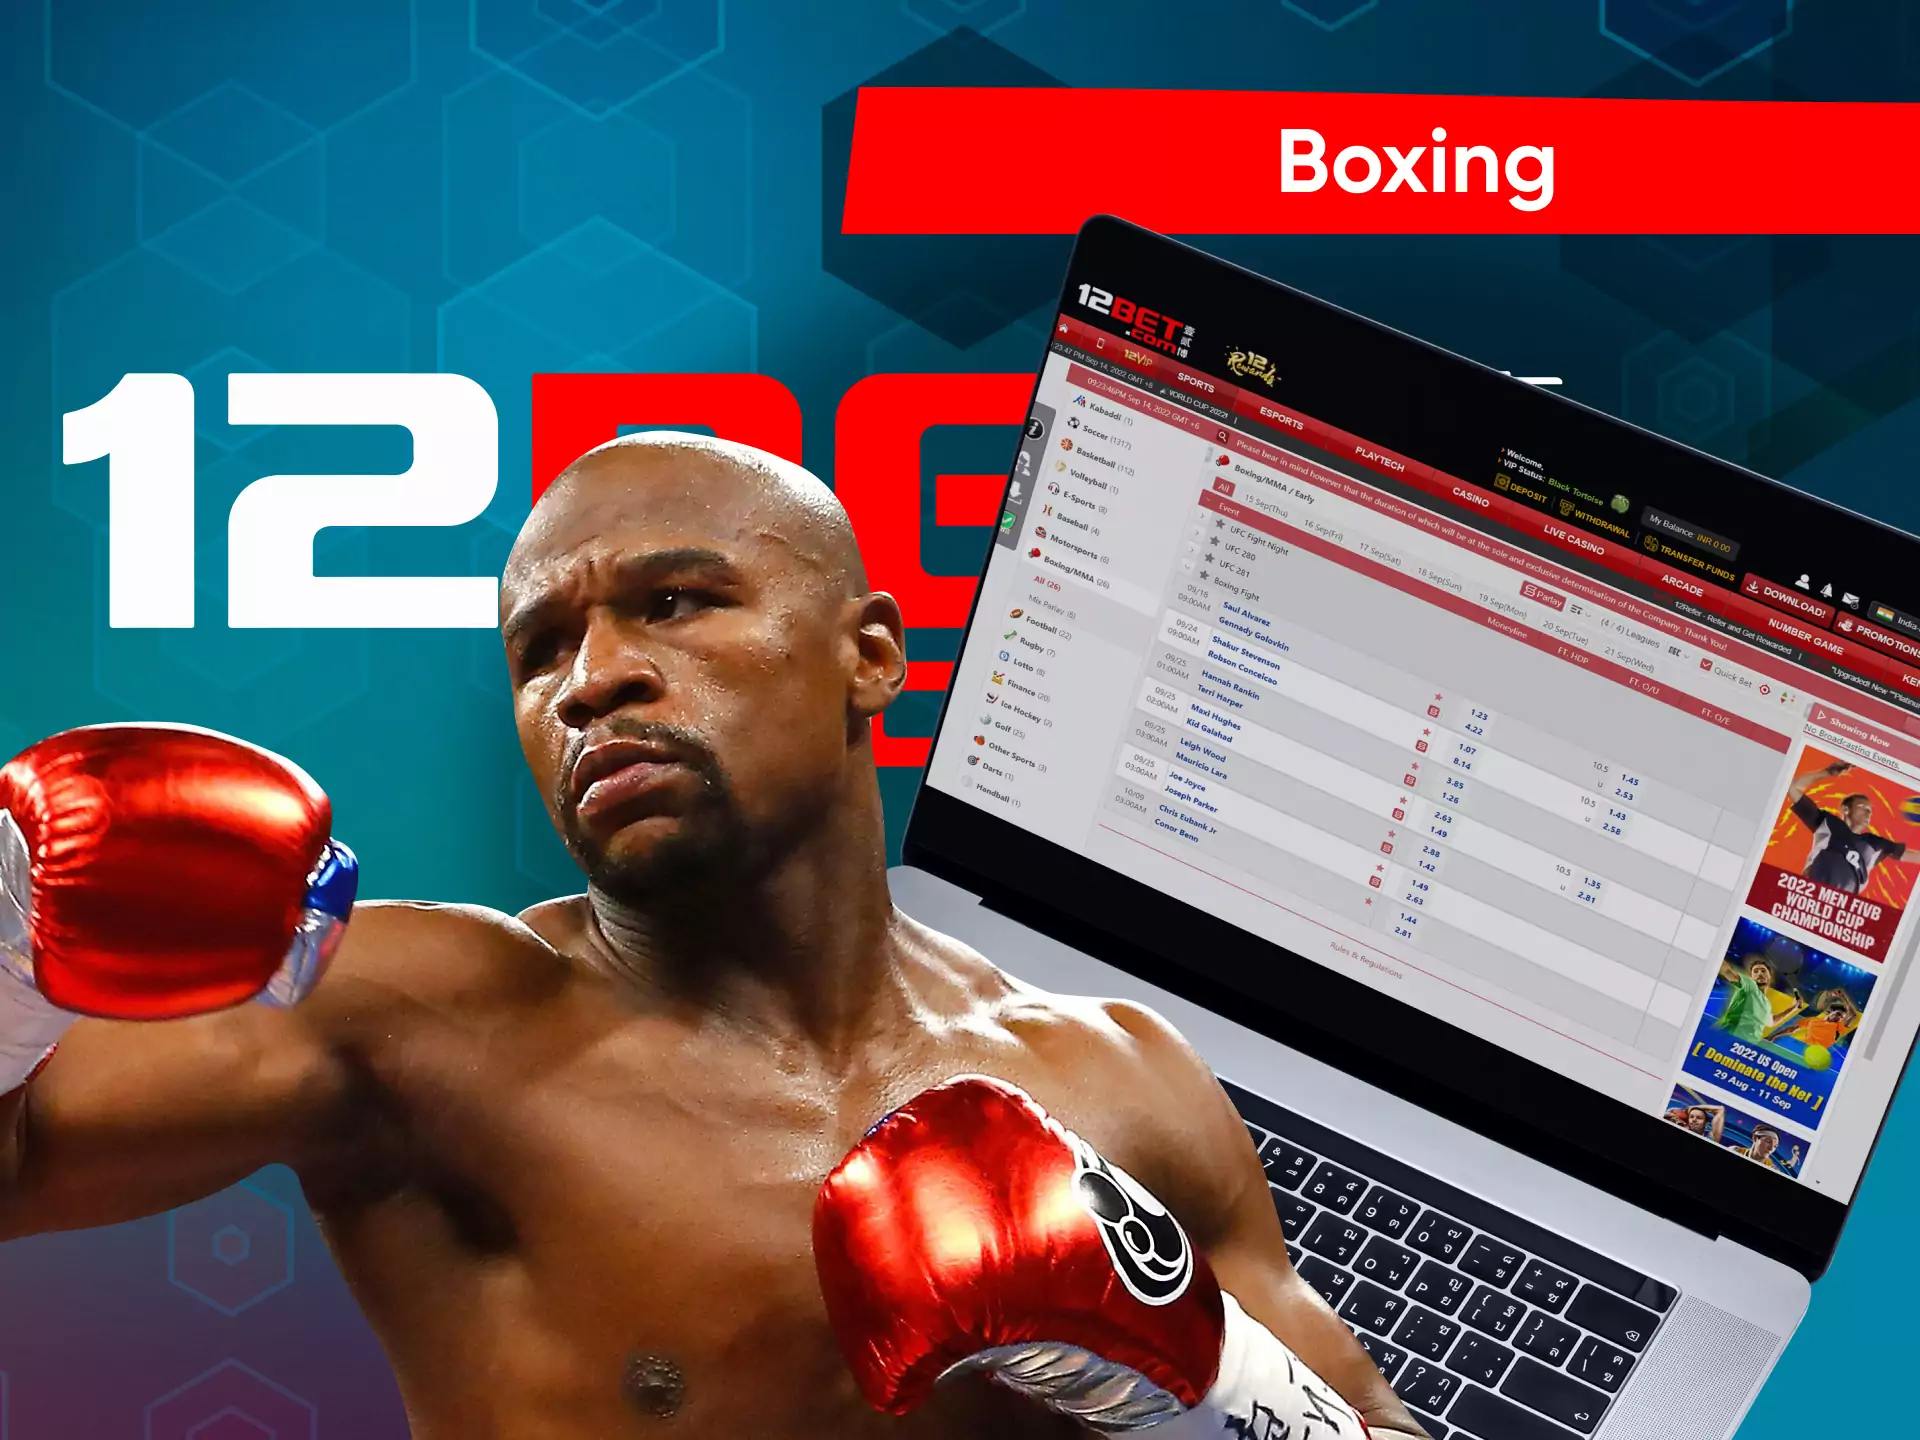 Betting on 12bet includes boxing fights as well.